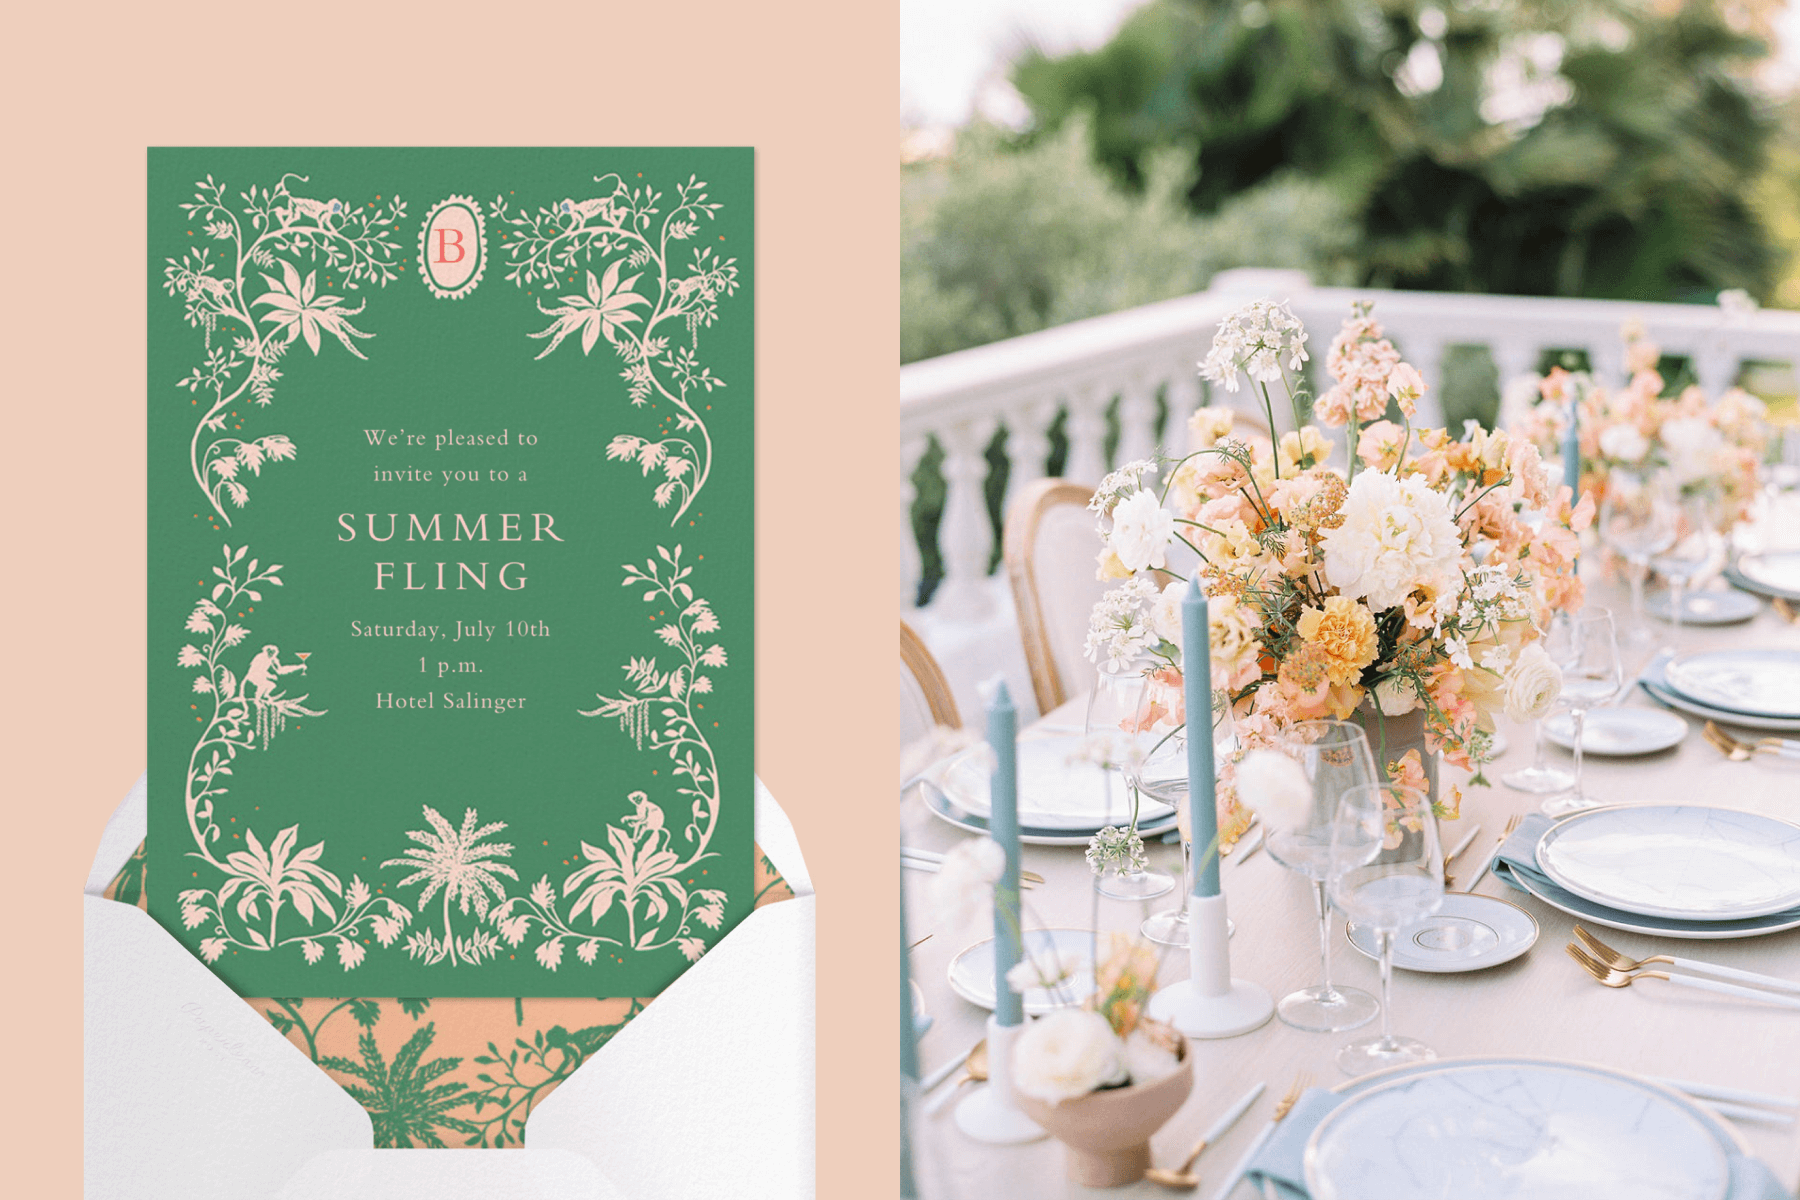 Left: A green party invitation with cream tropical florals; Right: A peach and light blue table setting.